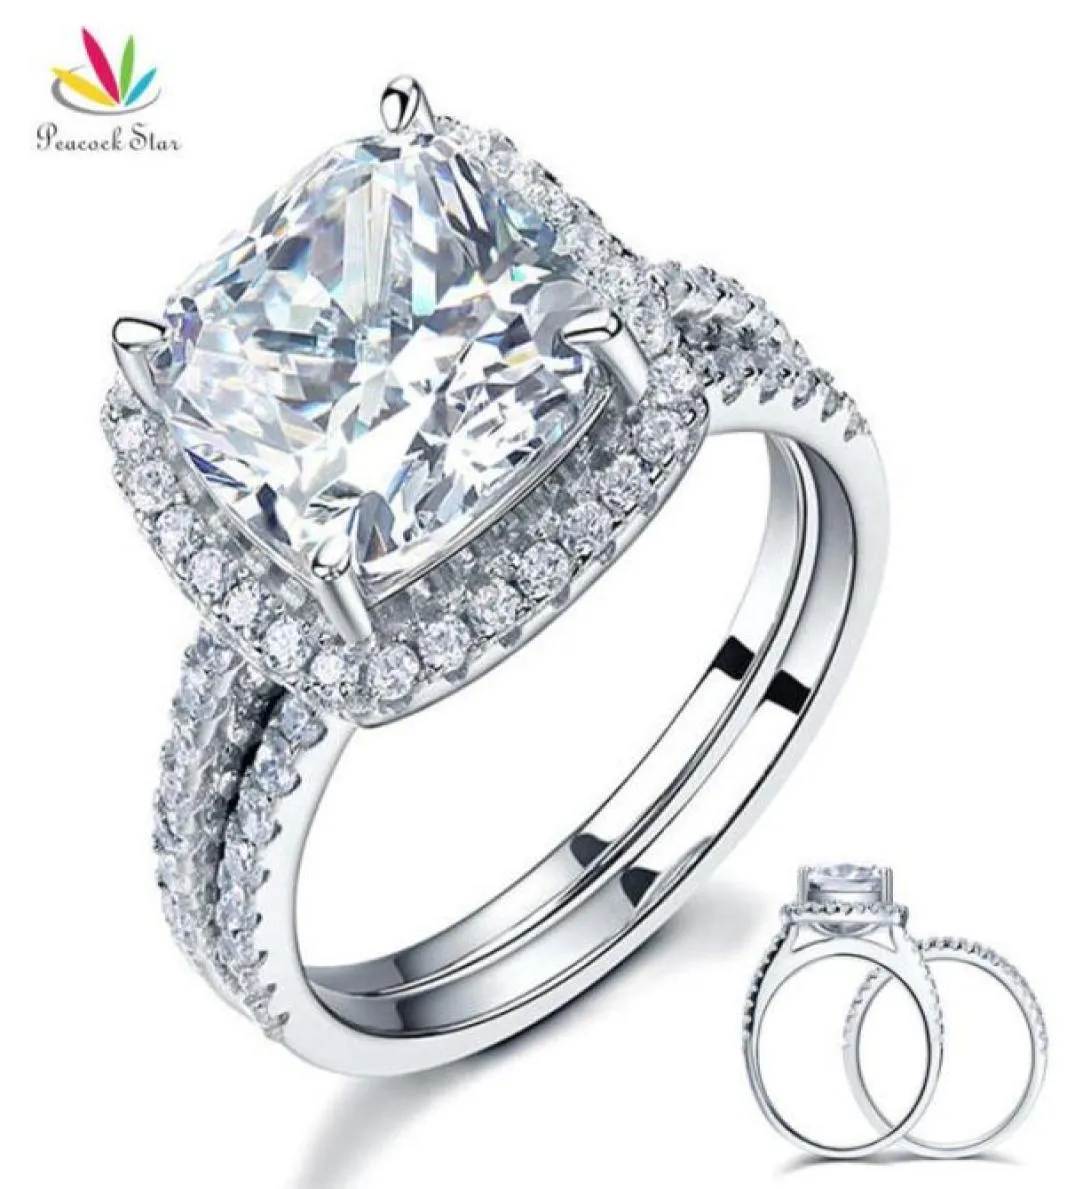 Peacock Star 5 Ct Cushion Cut Wedding Engagement Ring Set Solid 925 Sterling Silver Jewelry Cfr8205 J19071575591659500313